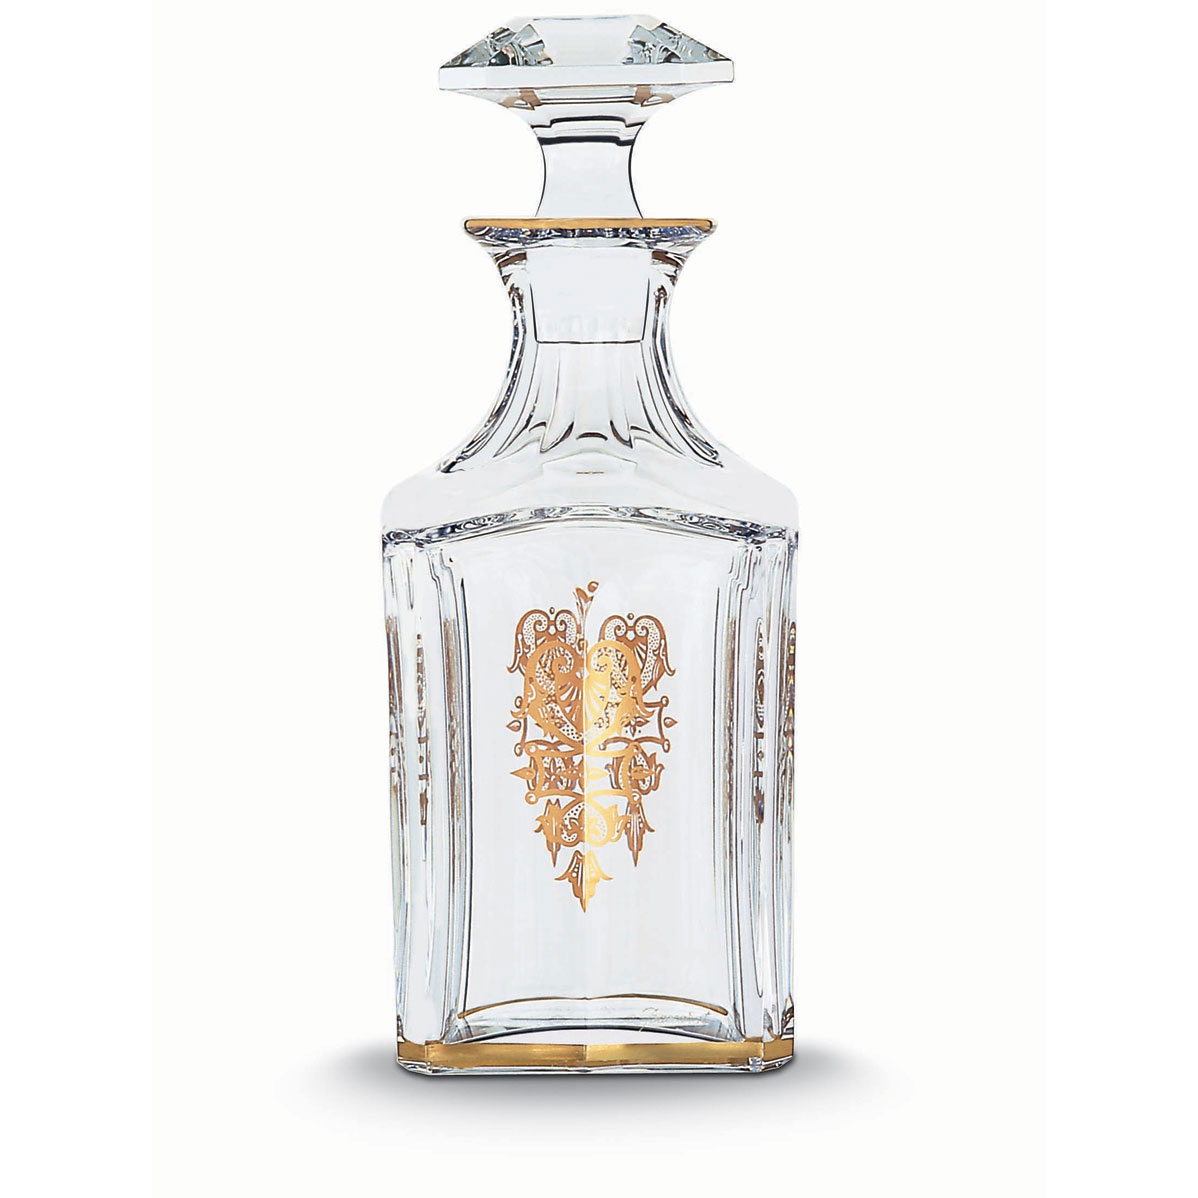 Baccarat Crystal, Harcourt Empire Square Whiskey Decanter